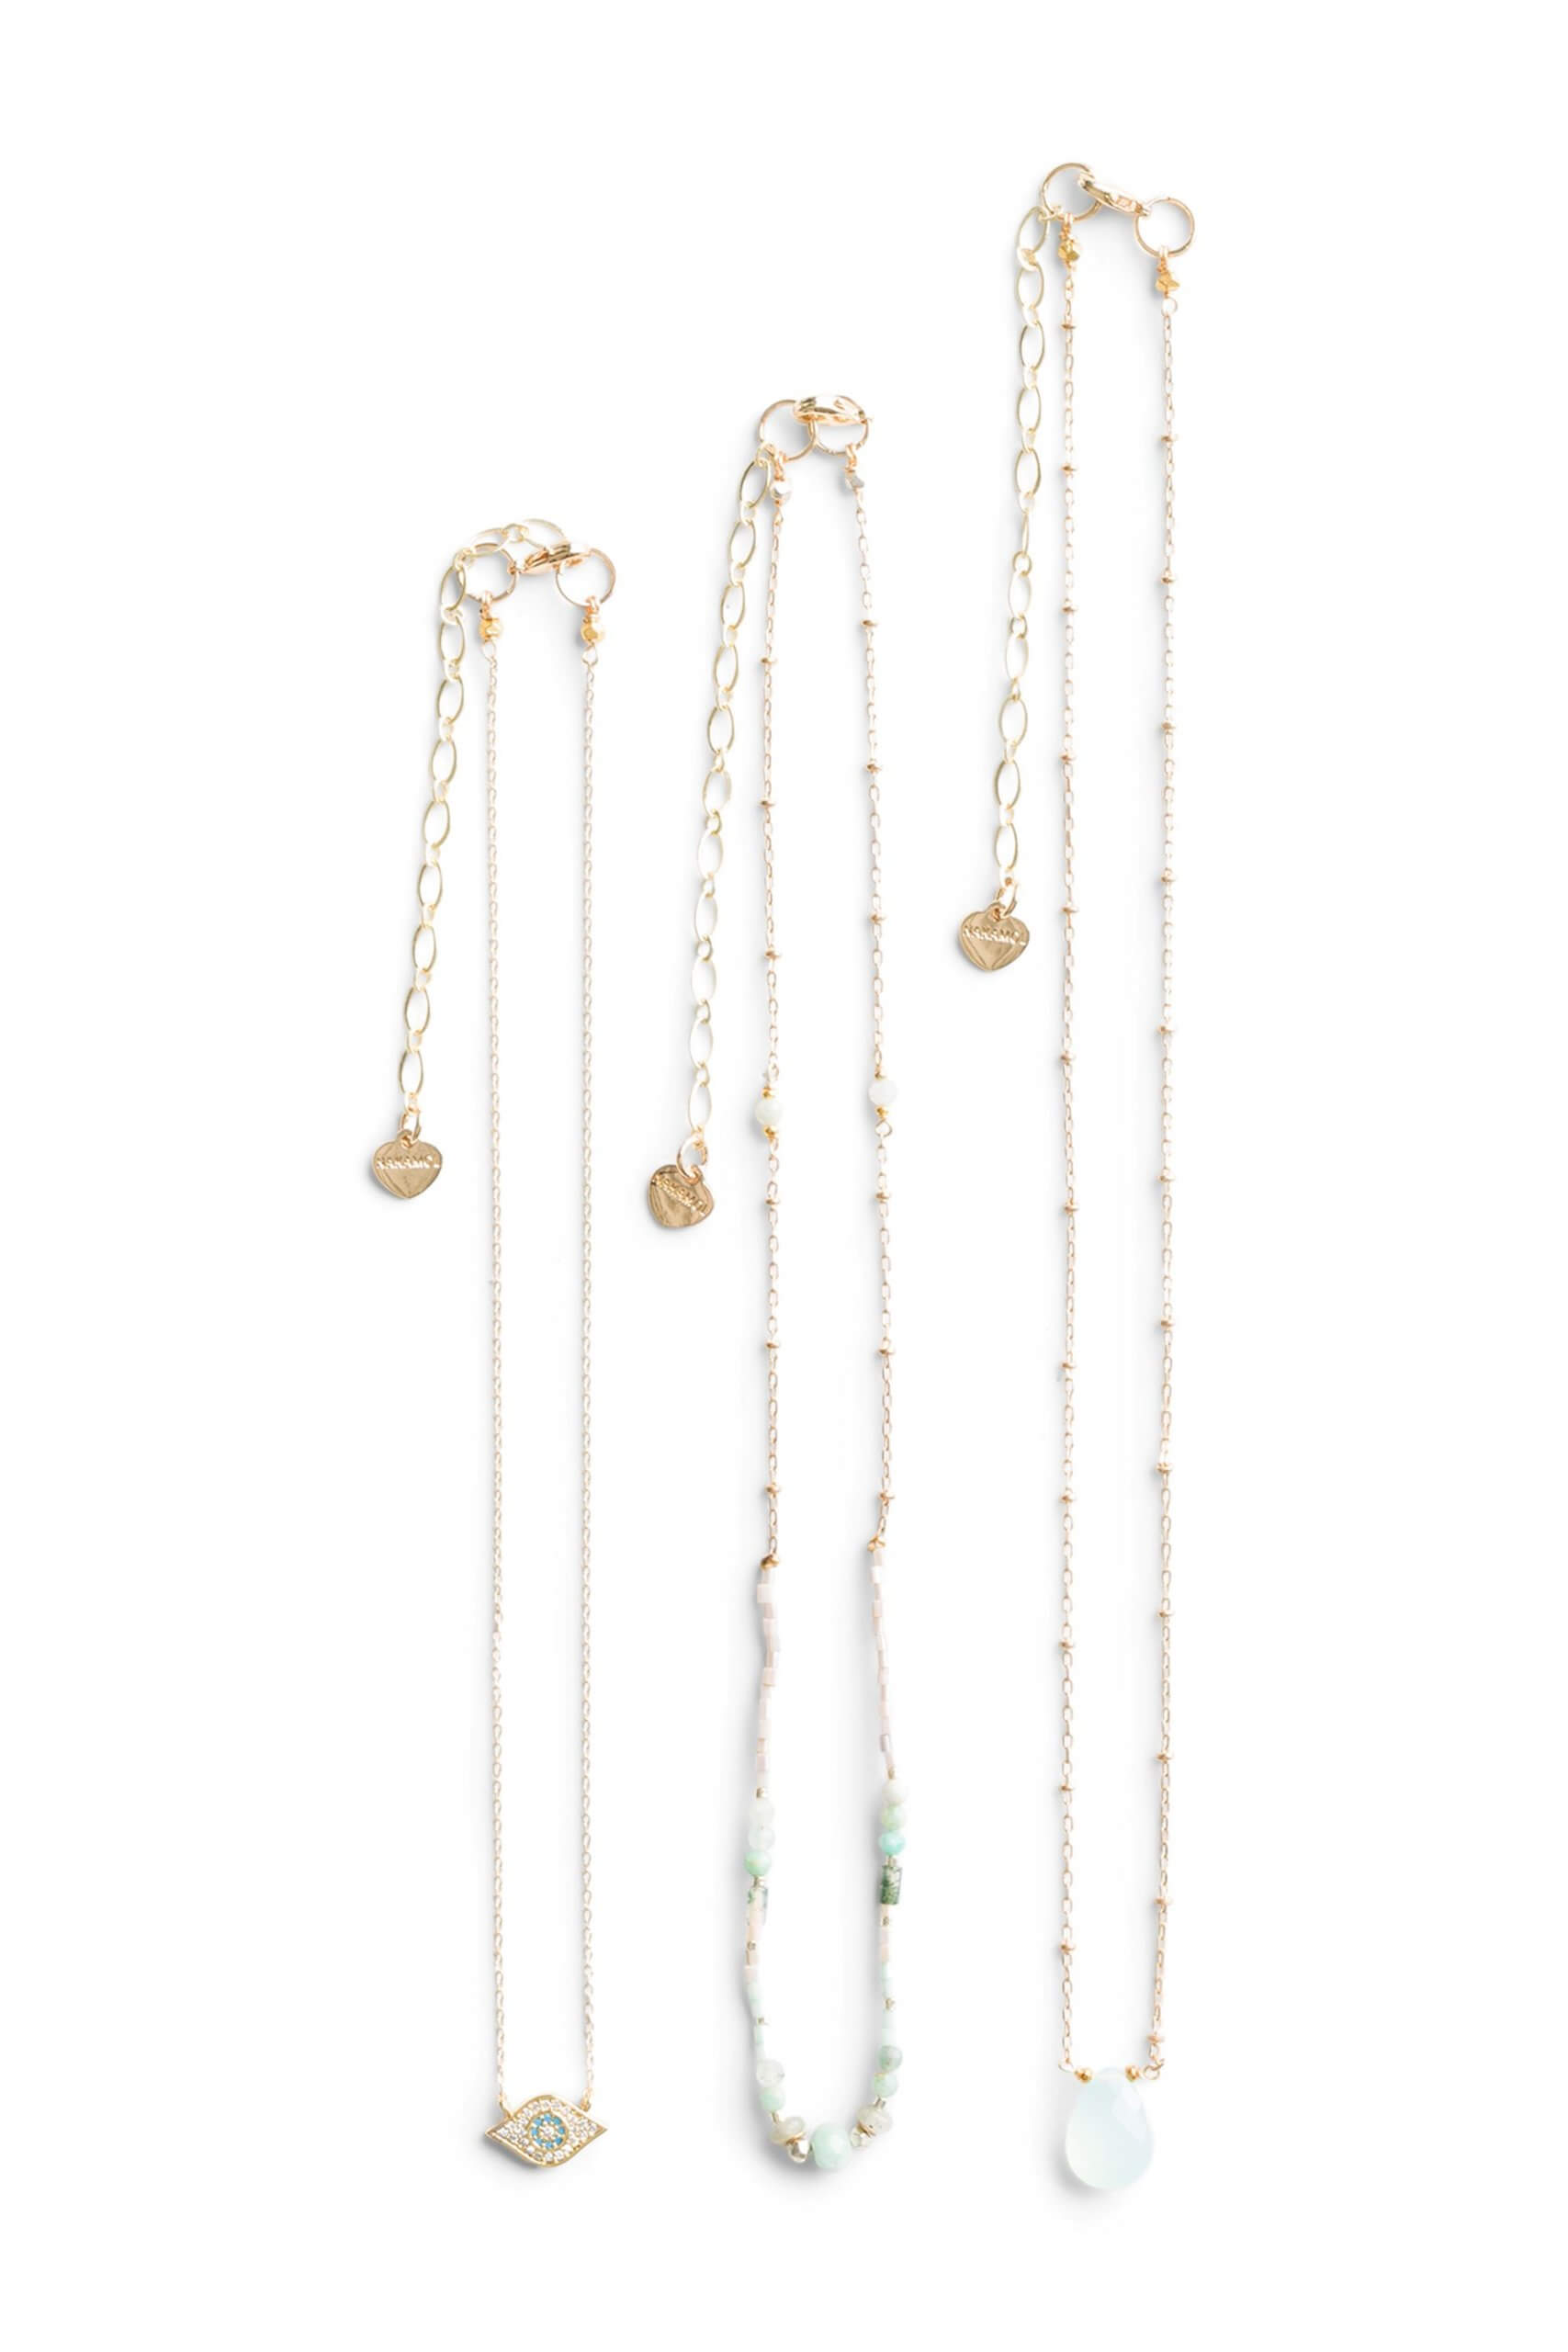 Stitch Fix Women's three-piece necklace set with gold chains and light blue beads.